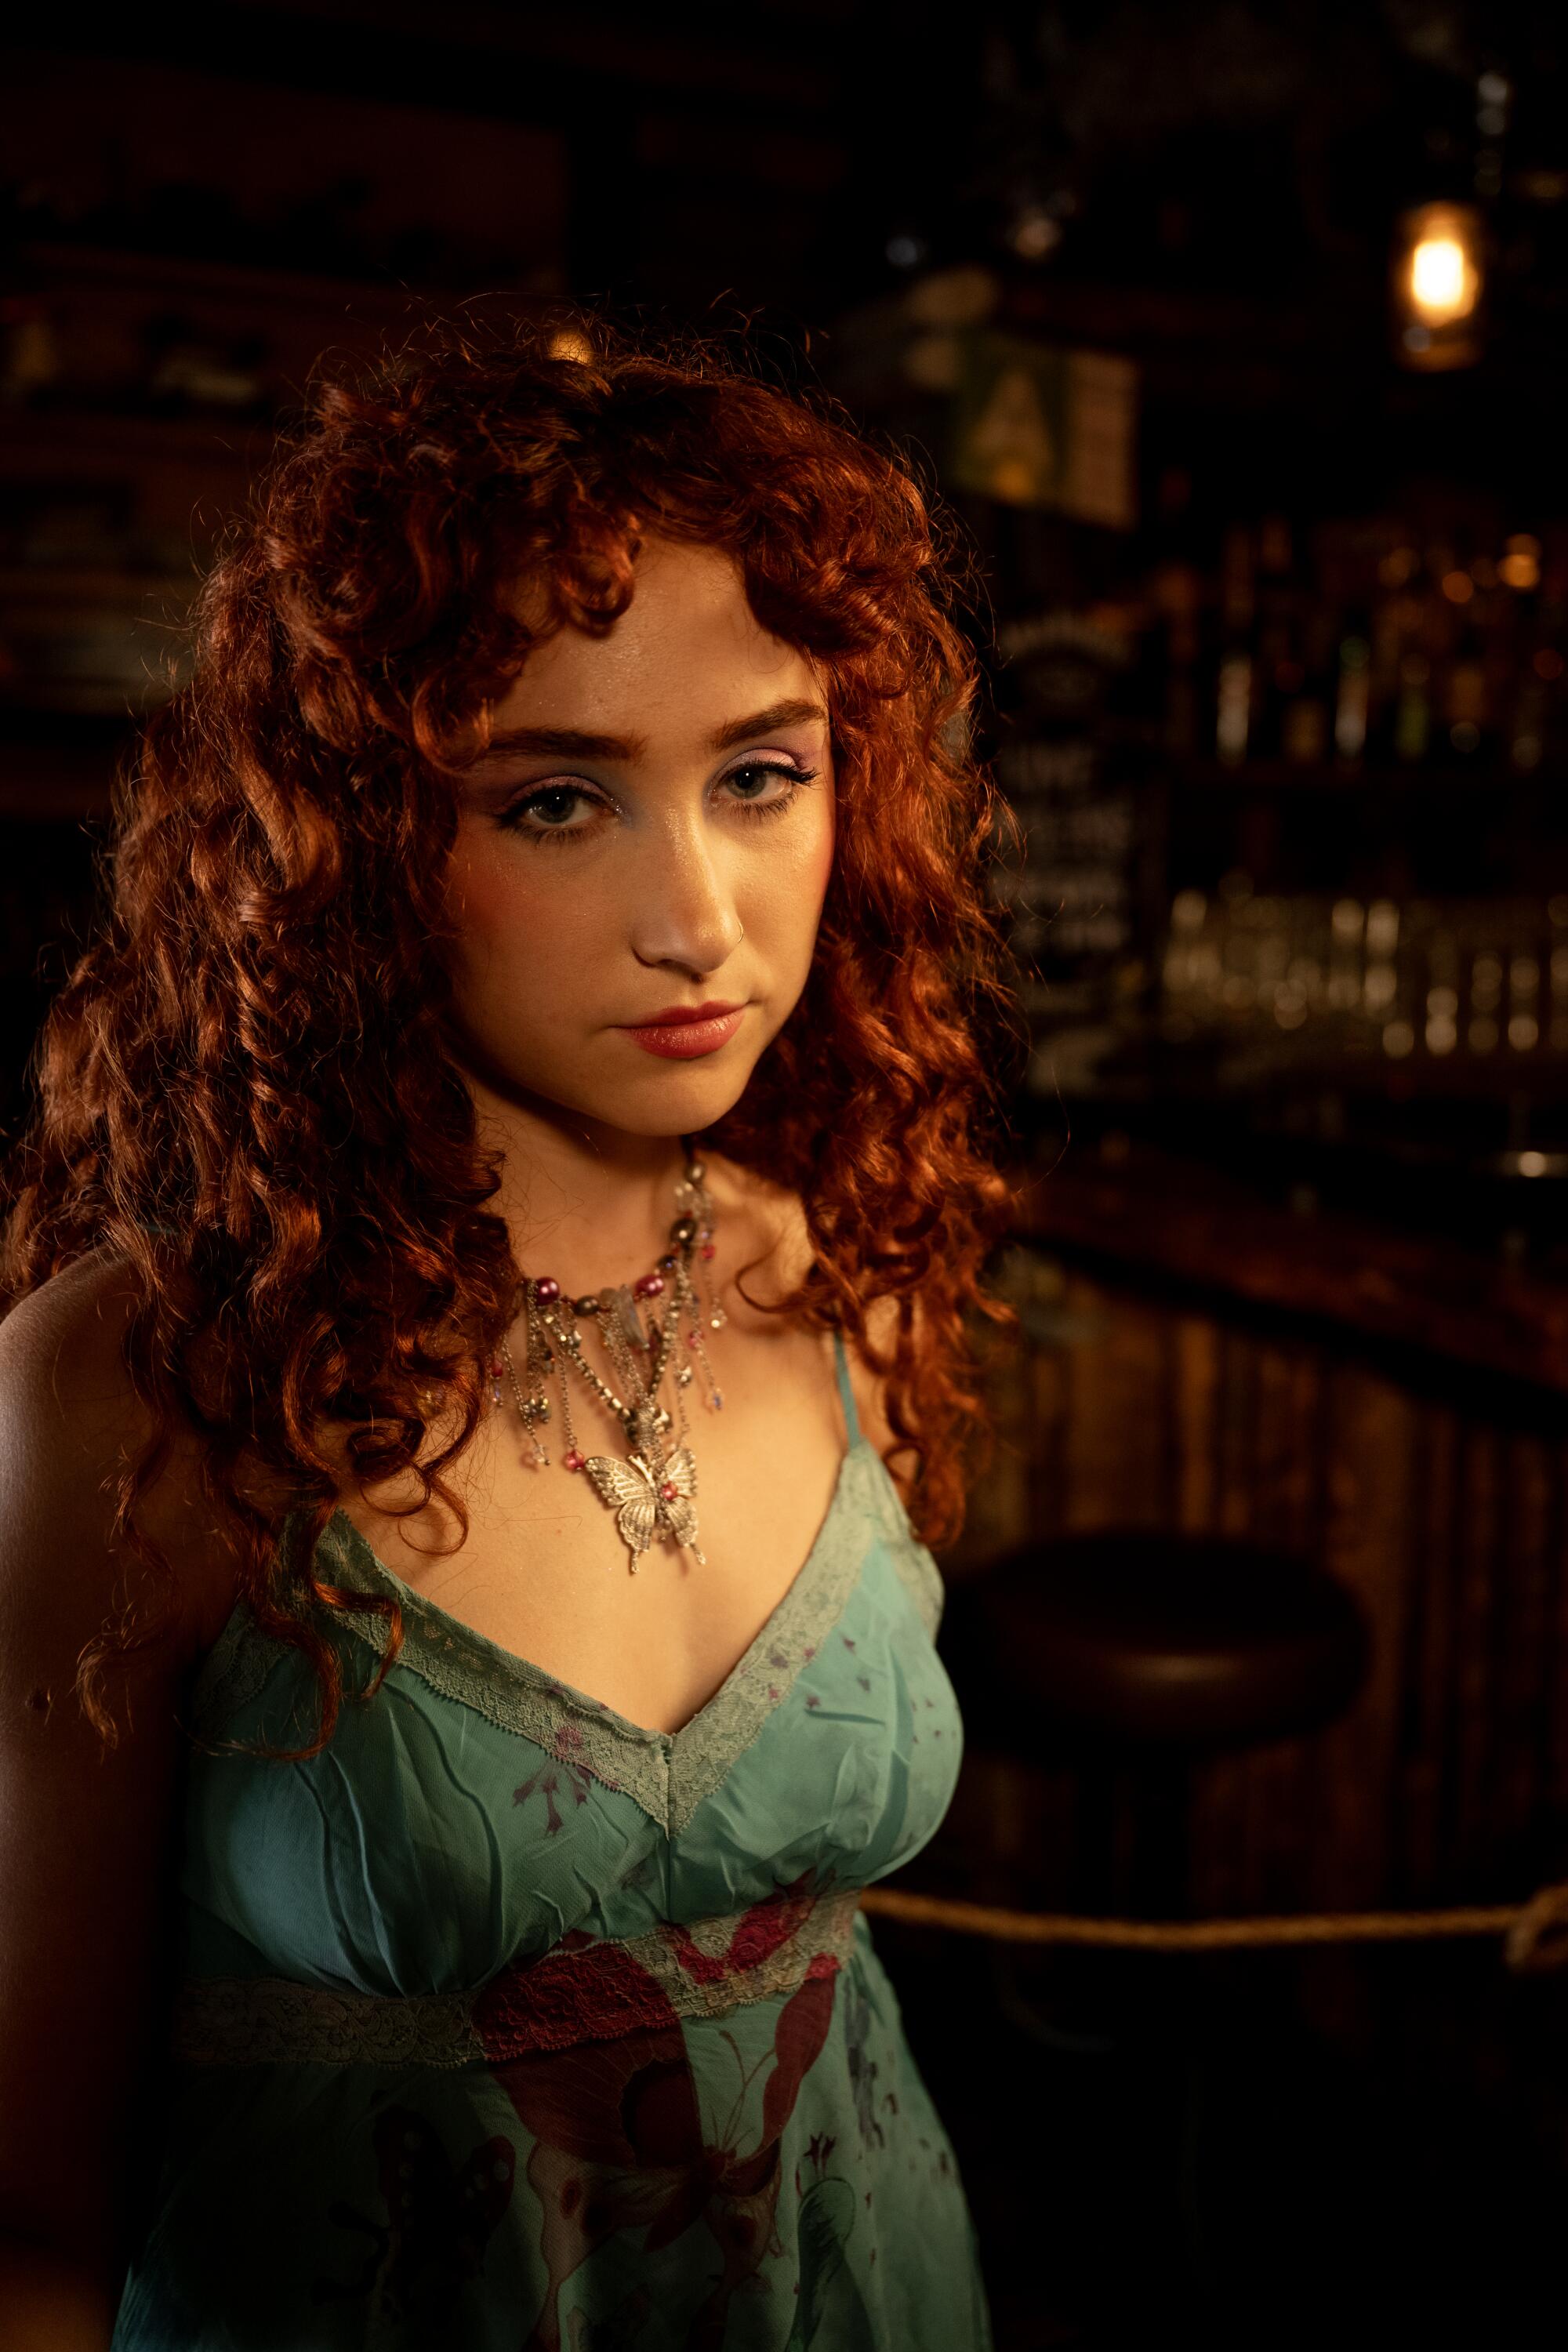 A red-headed woman in a green top and necklace looks downward pensively.